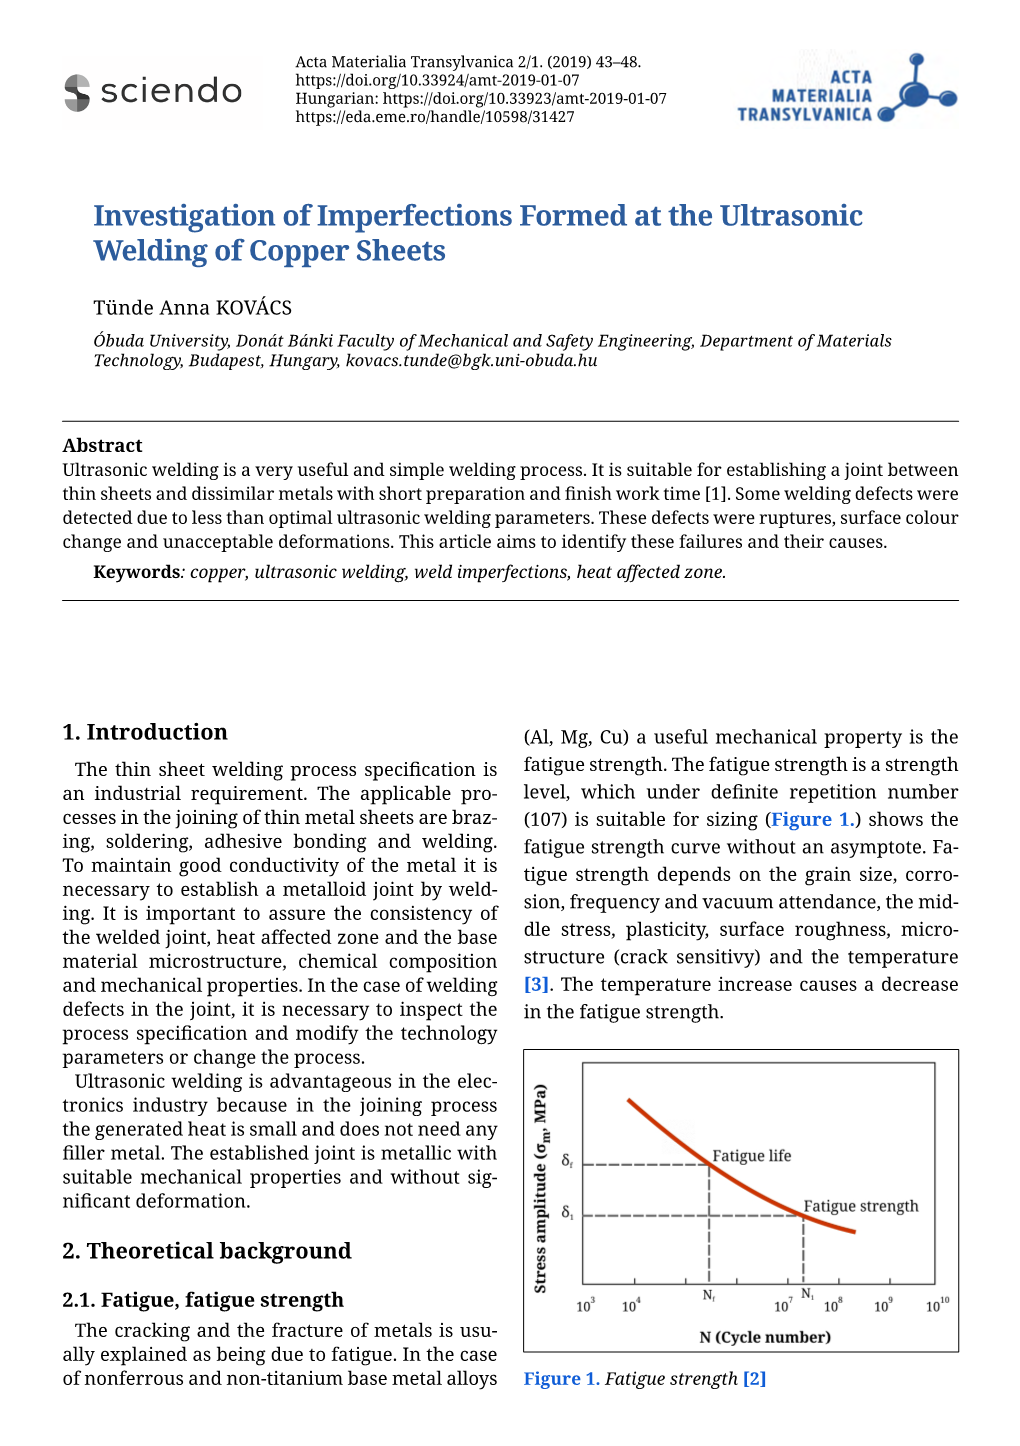 Investigation of Imperfections Formed at the Ultrasonic Welding of Copper Sheets